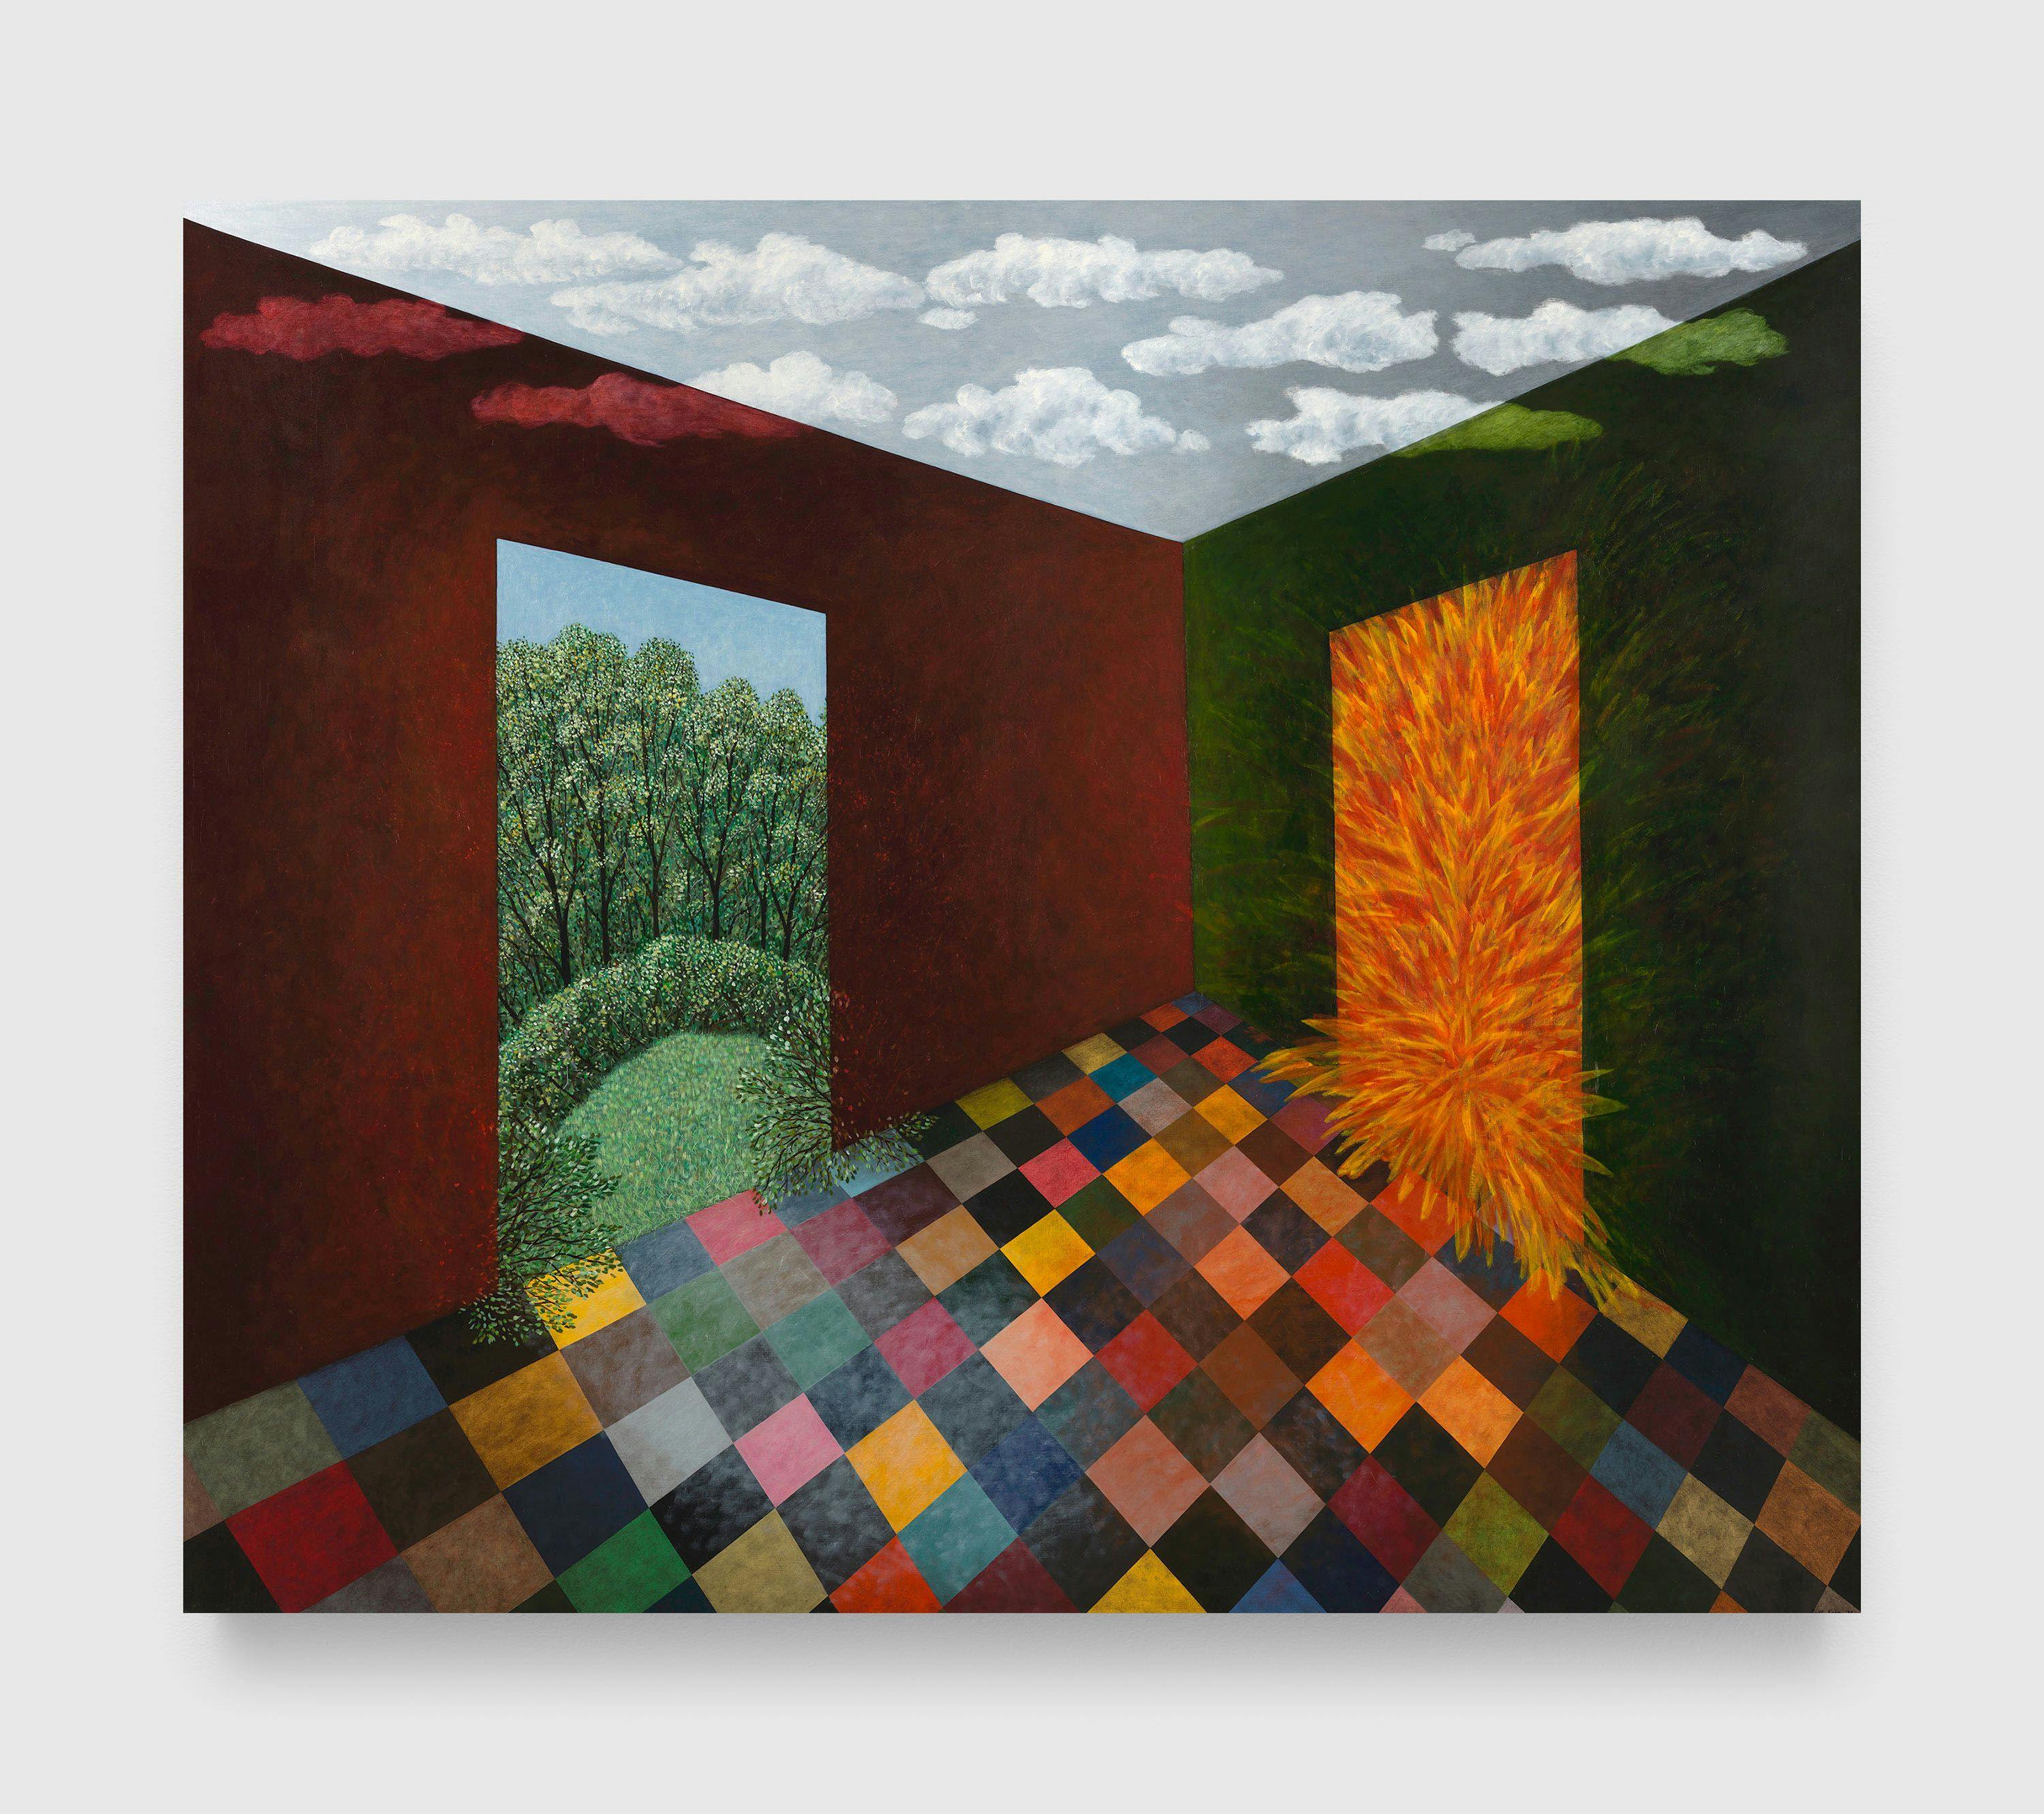 A painting by Scott Kahn, titled Doorways, dated 1998.